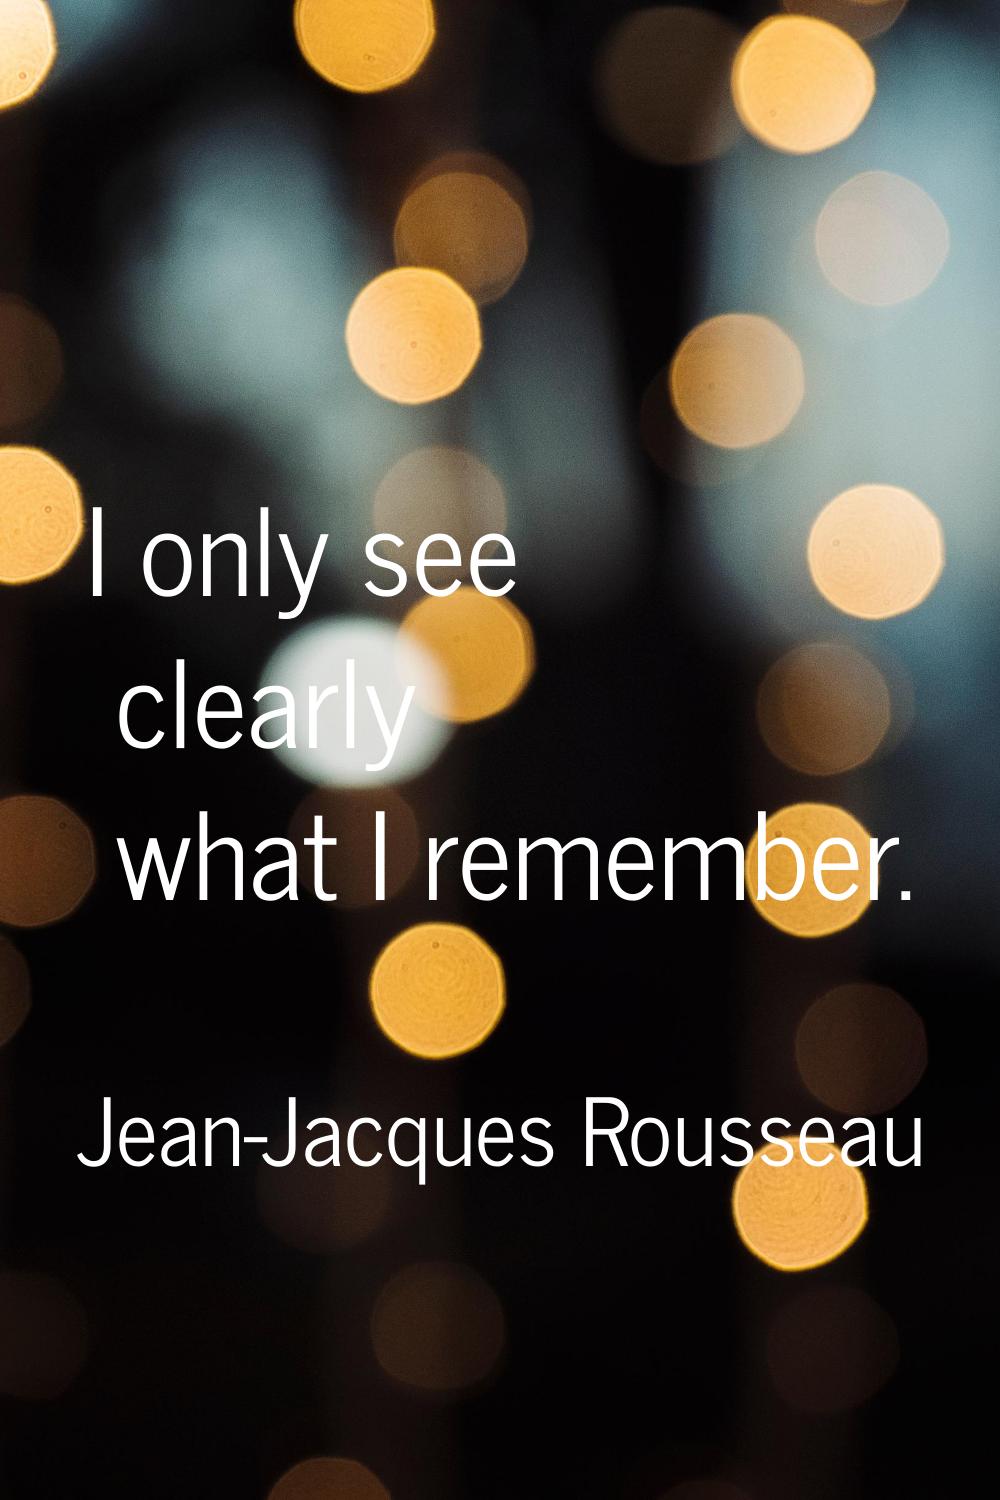 I only see clearly what I remember.